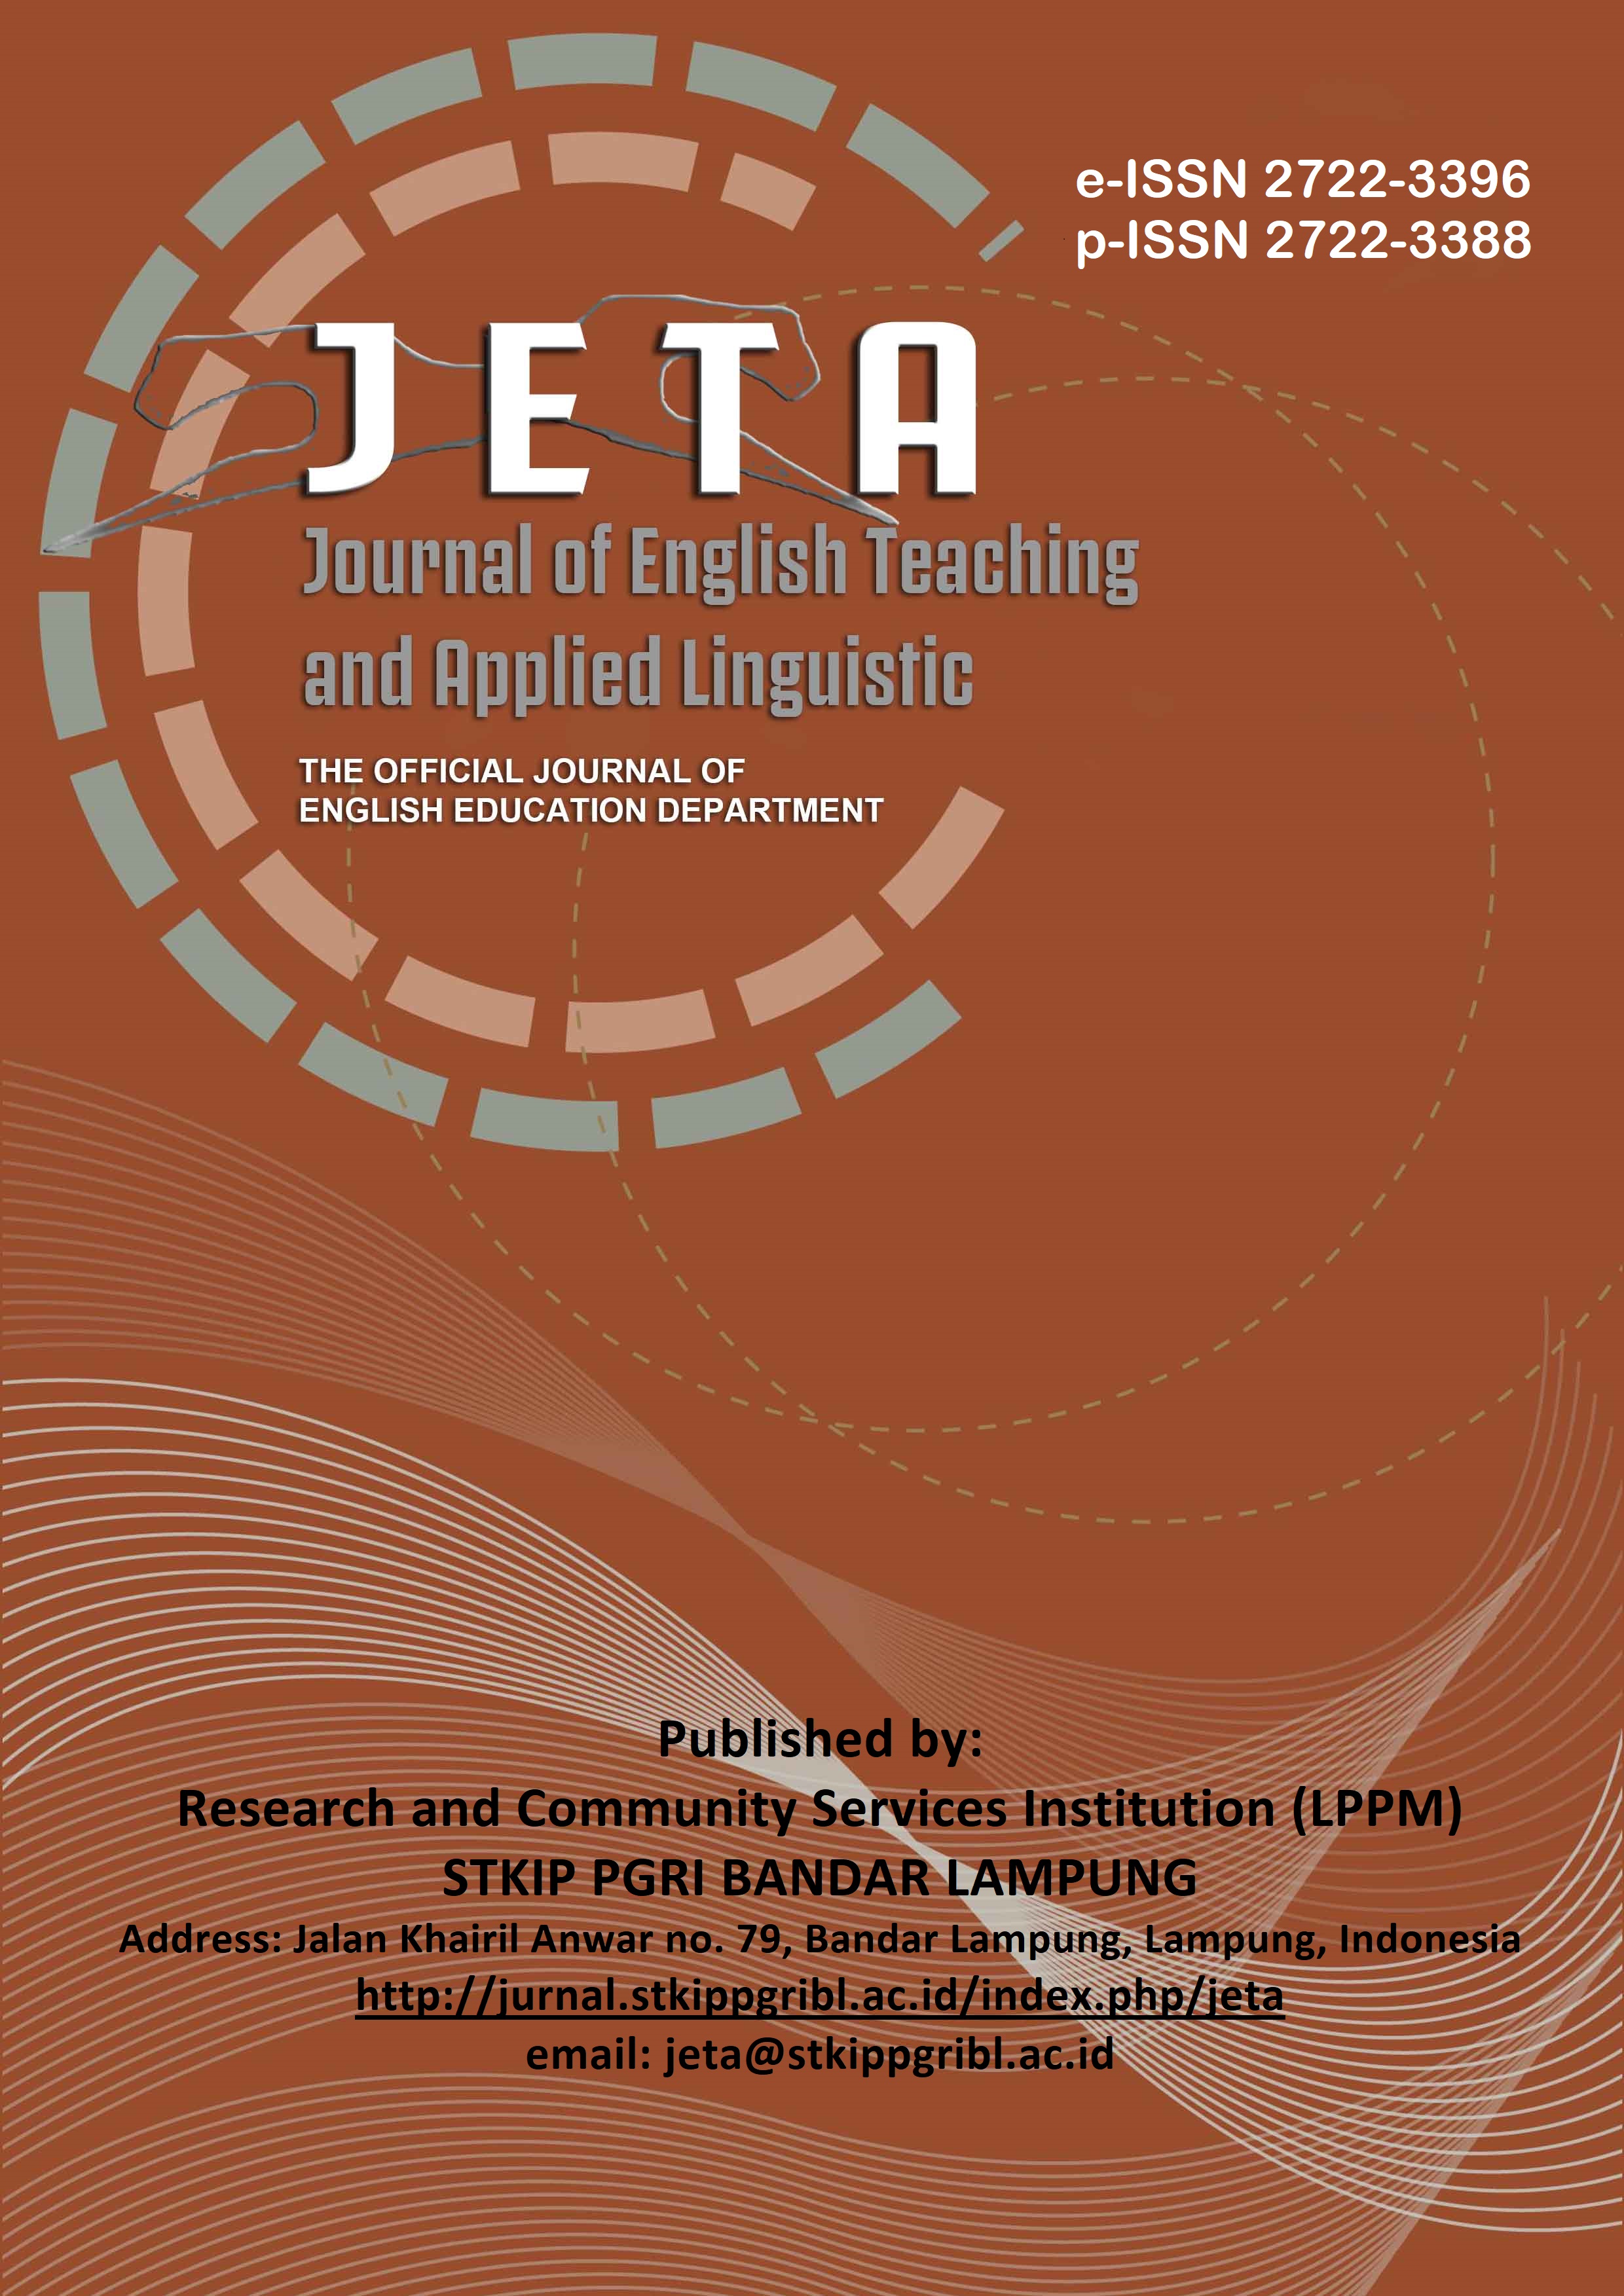 					View Vol. 1 No. 2 (2020): JETA: Journal of English Teaching and Applied Linguistic
				